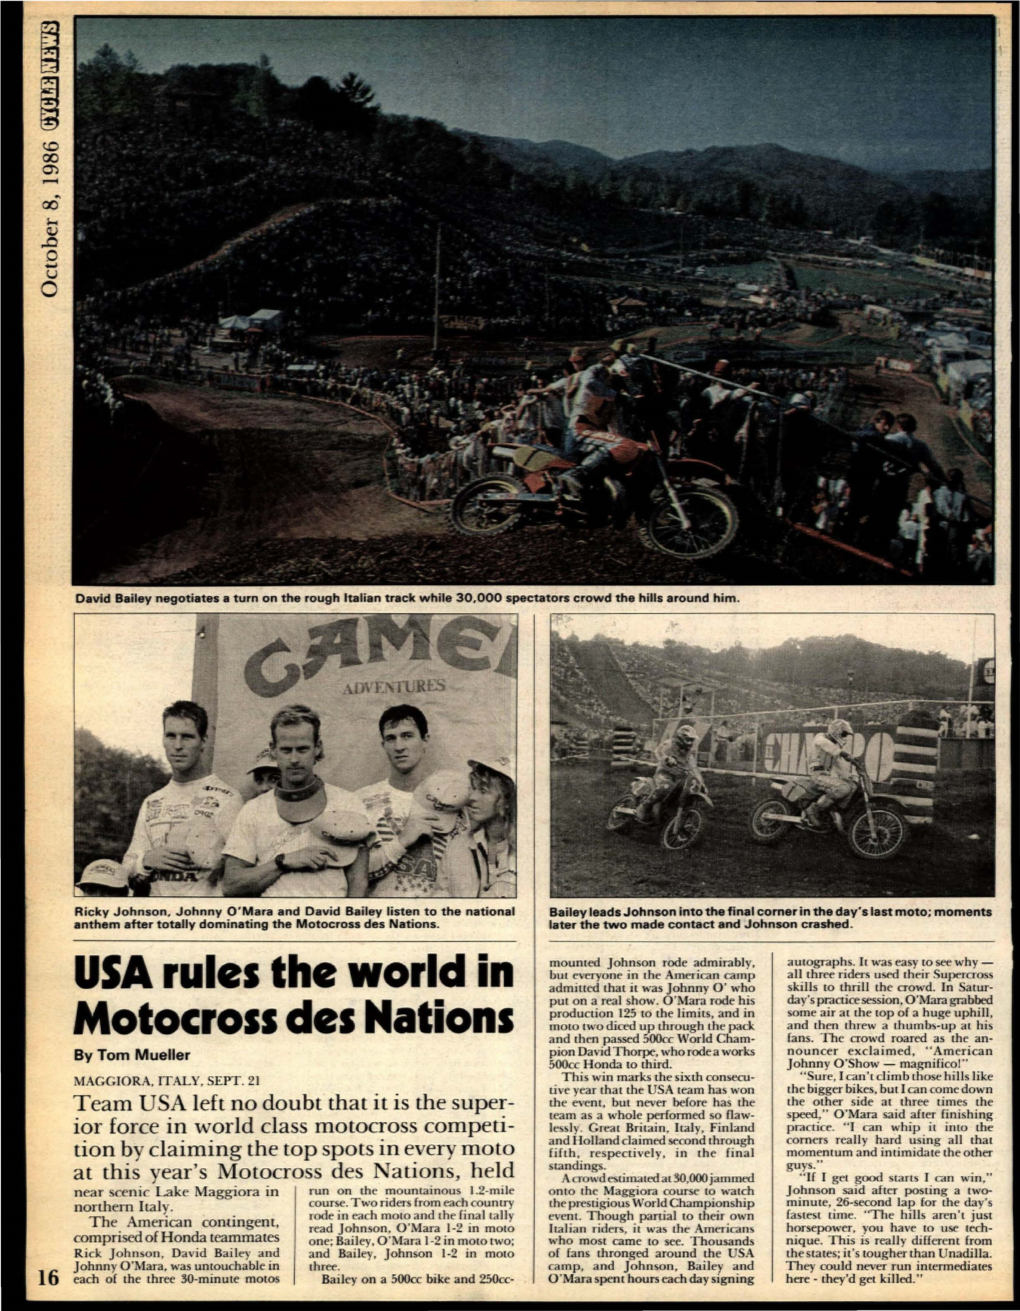 USA Rules the World in Motocross Des Nations